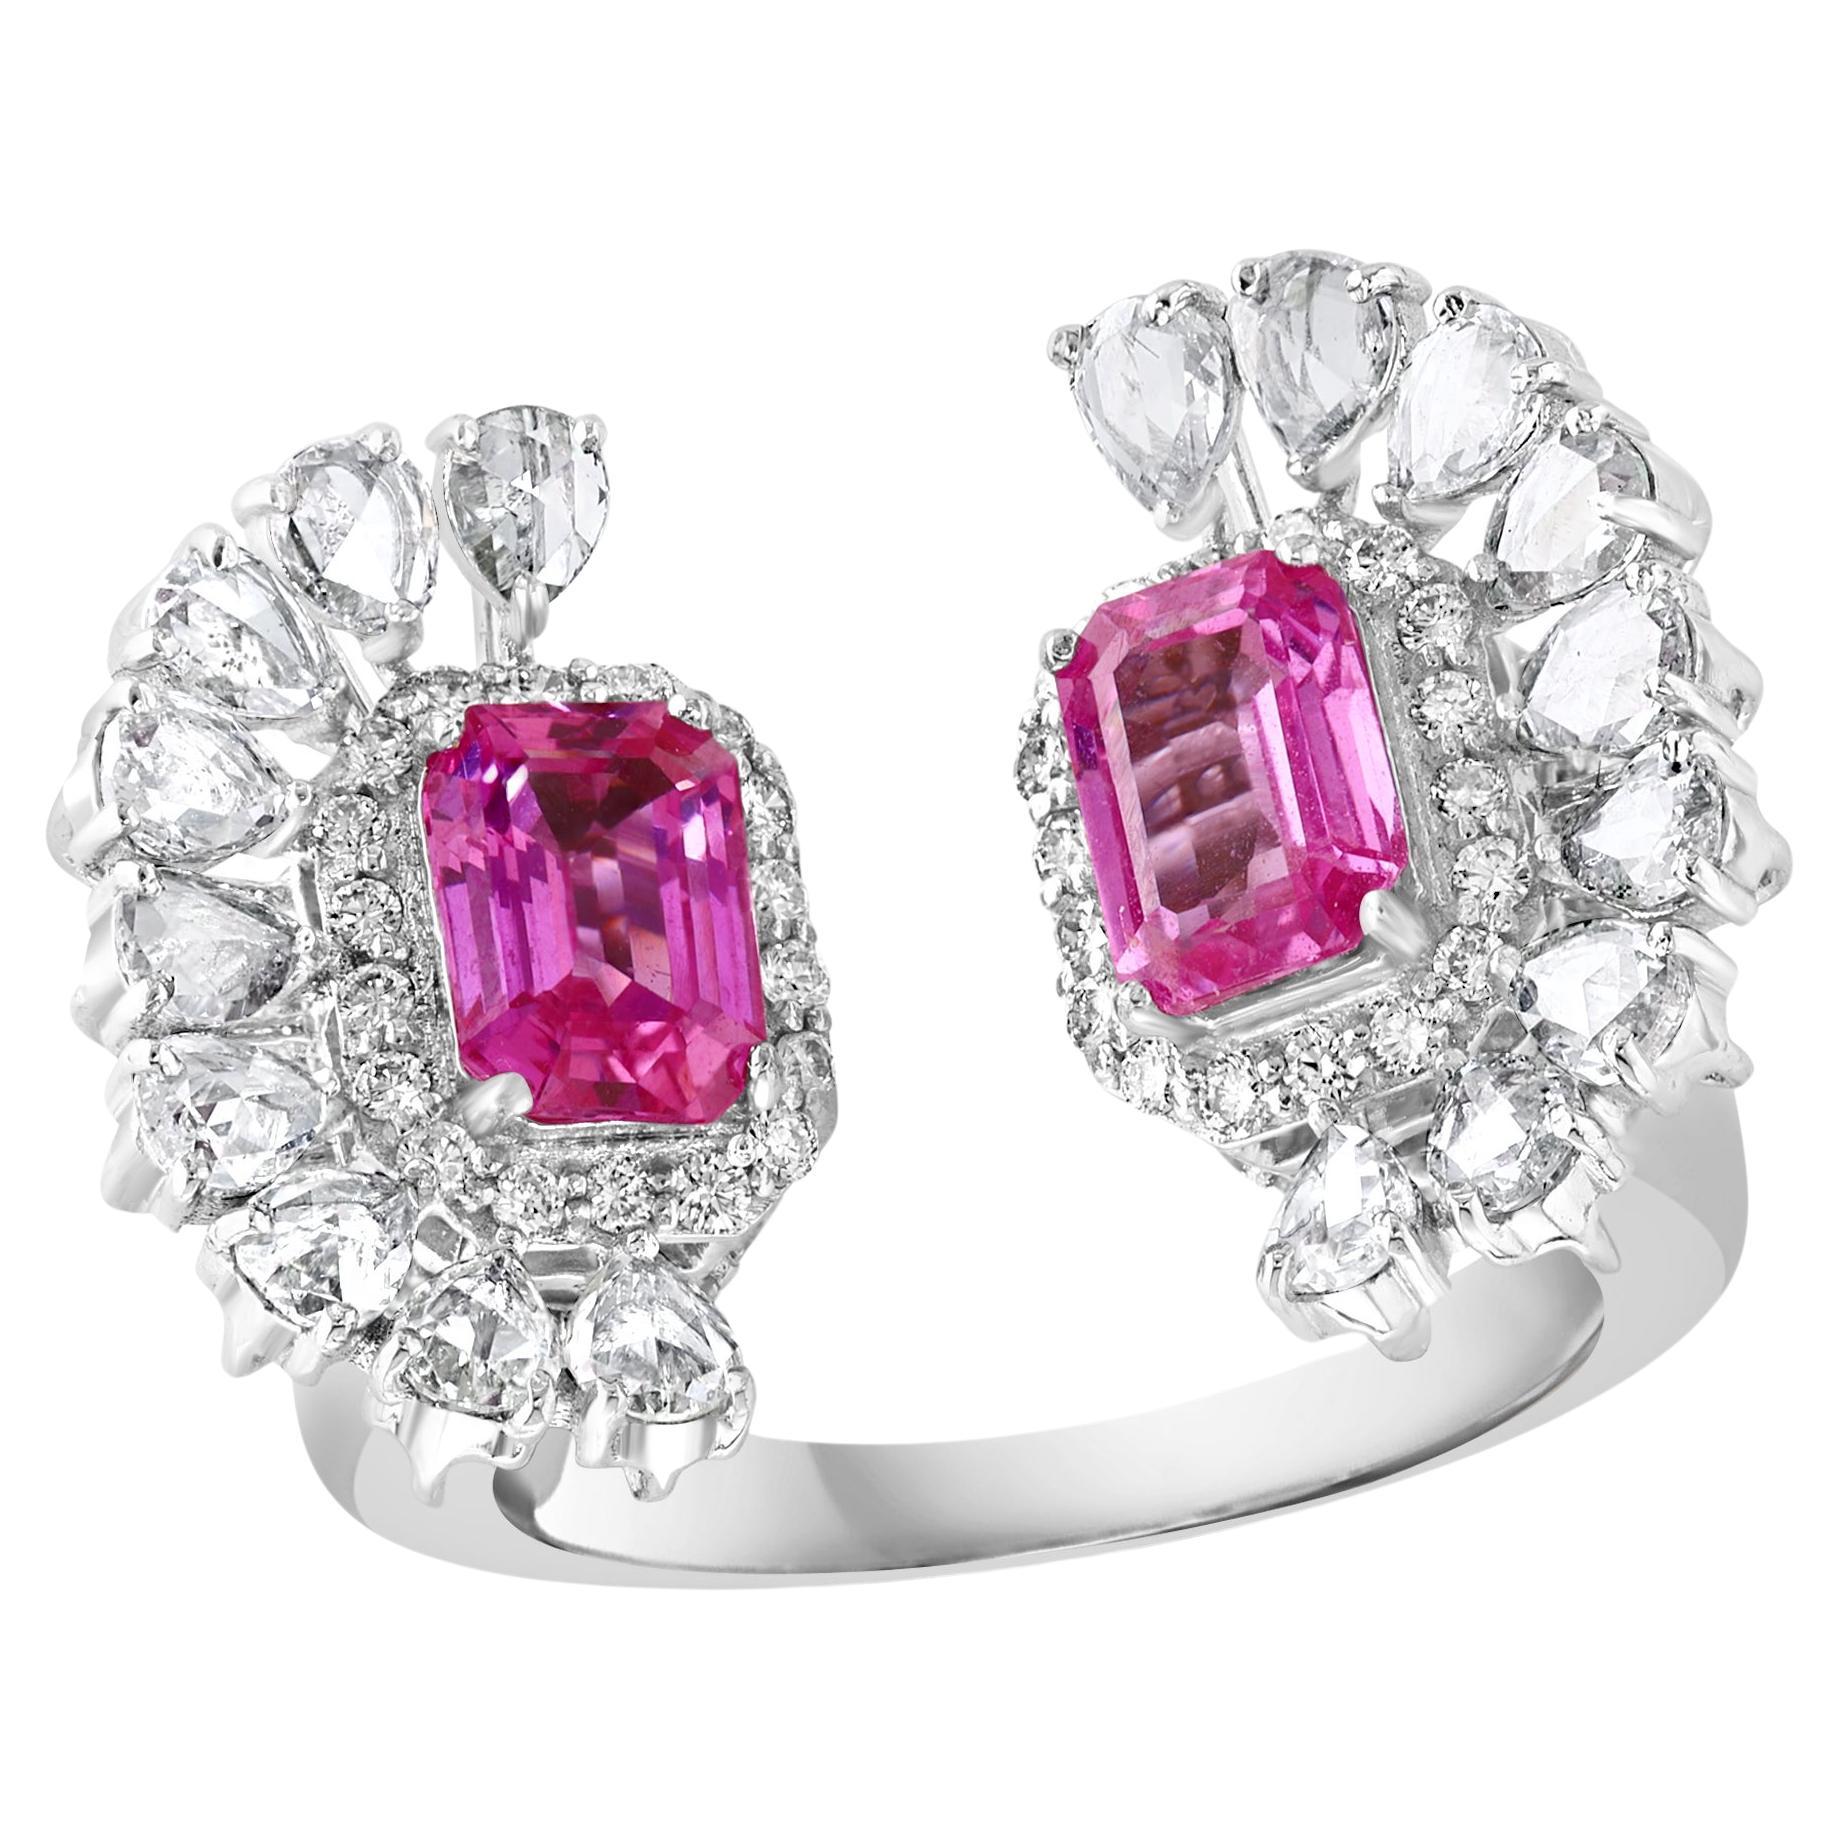 2.5 Ct Pink Emerald Cut Pink  Sapphire & 2.8 Ct Diamond 18 Kt White Gold Ring S6 For Sale